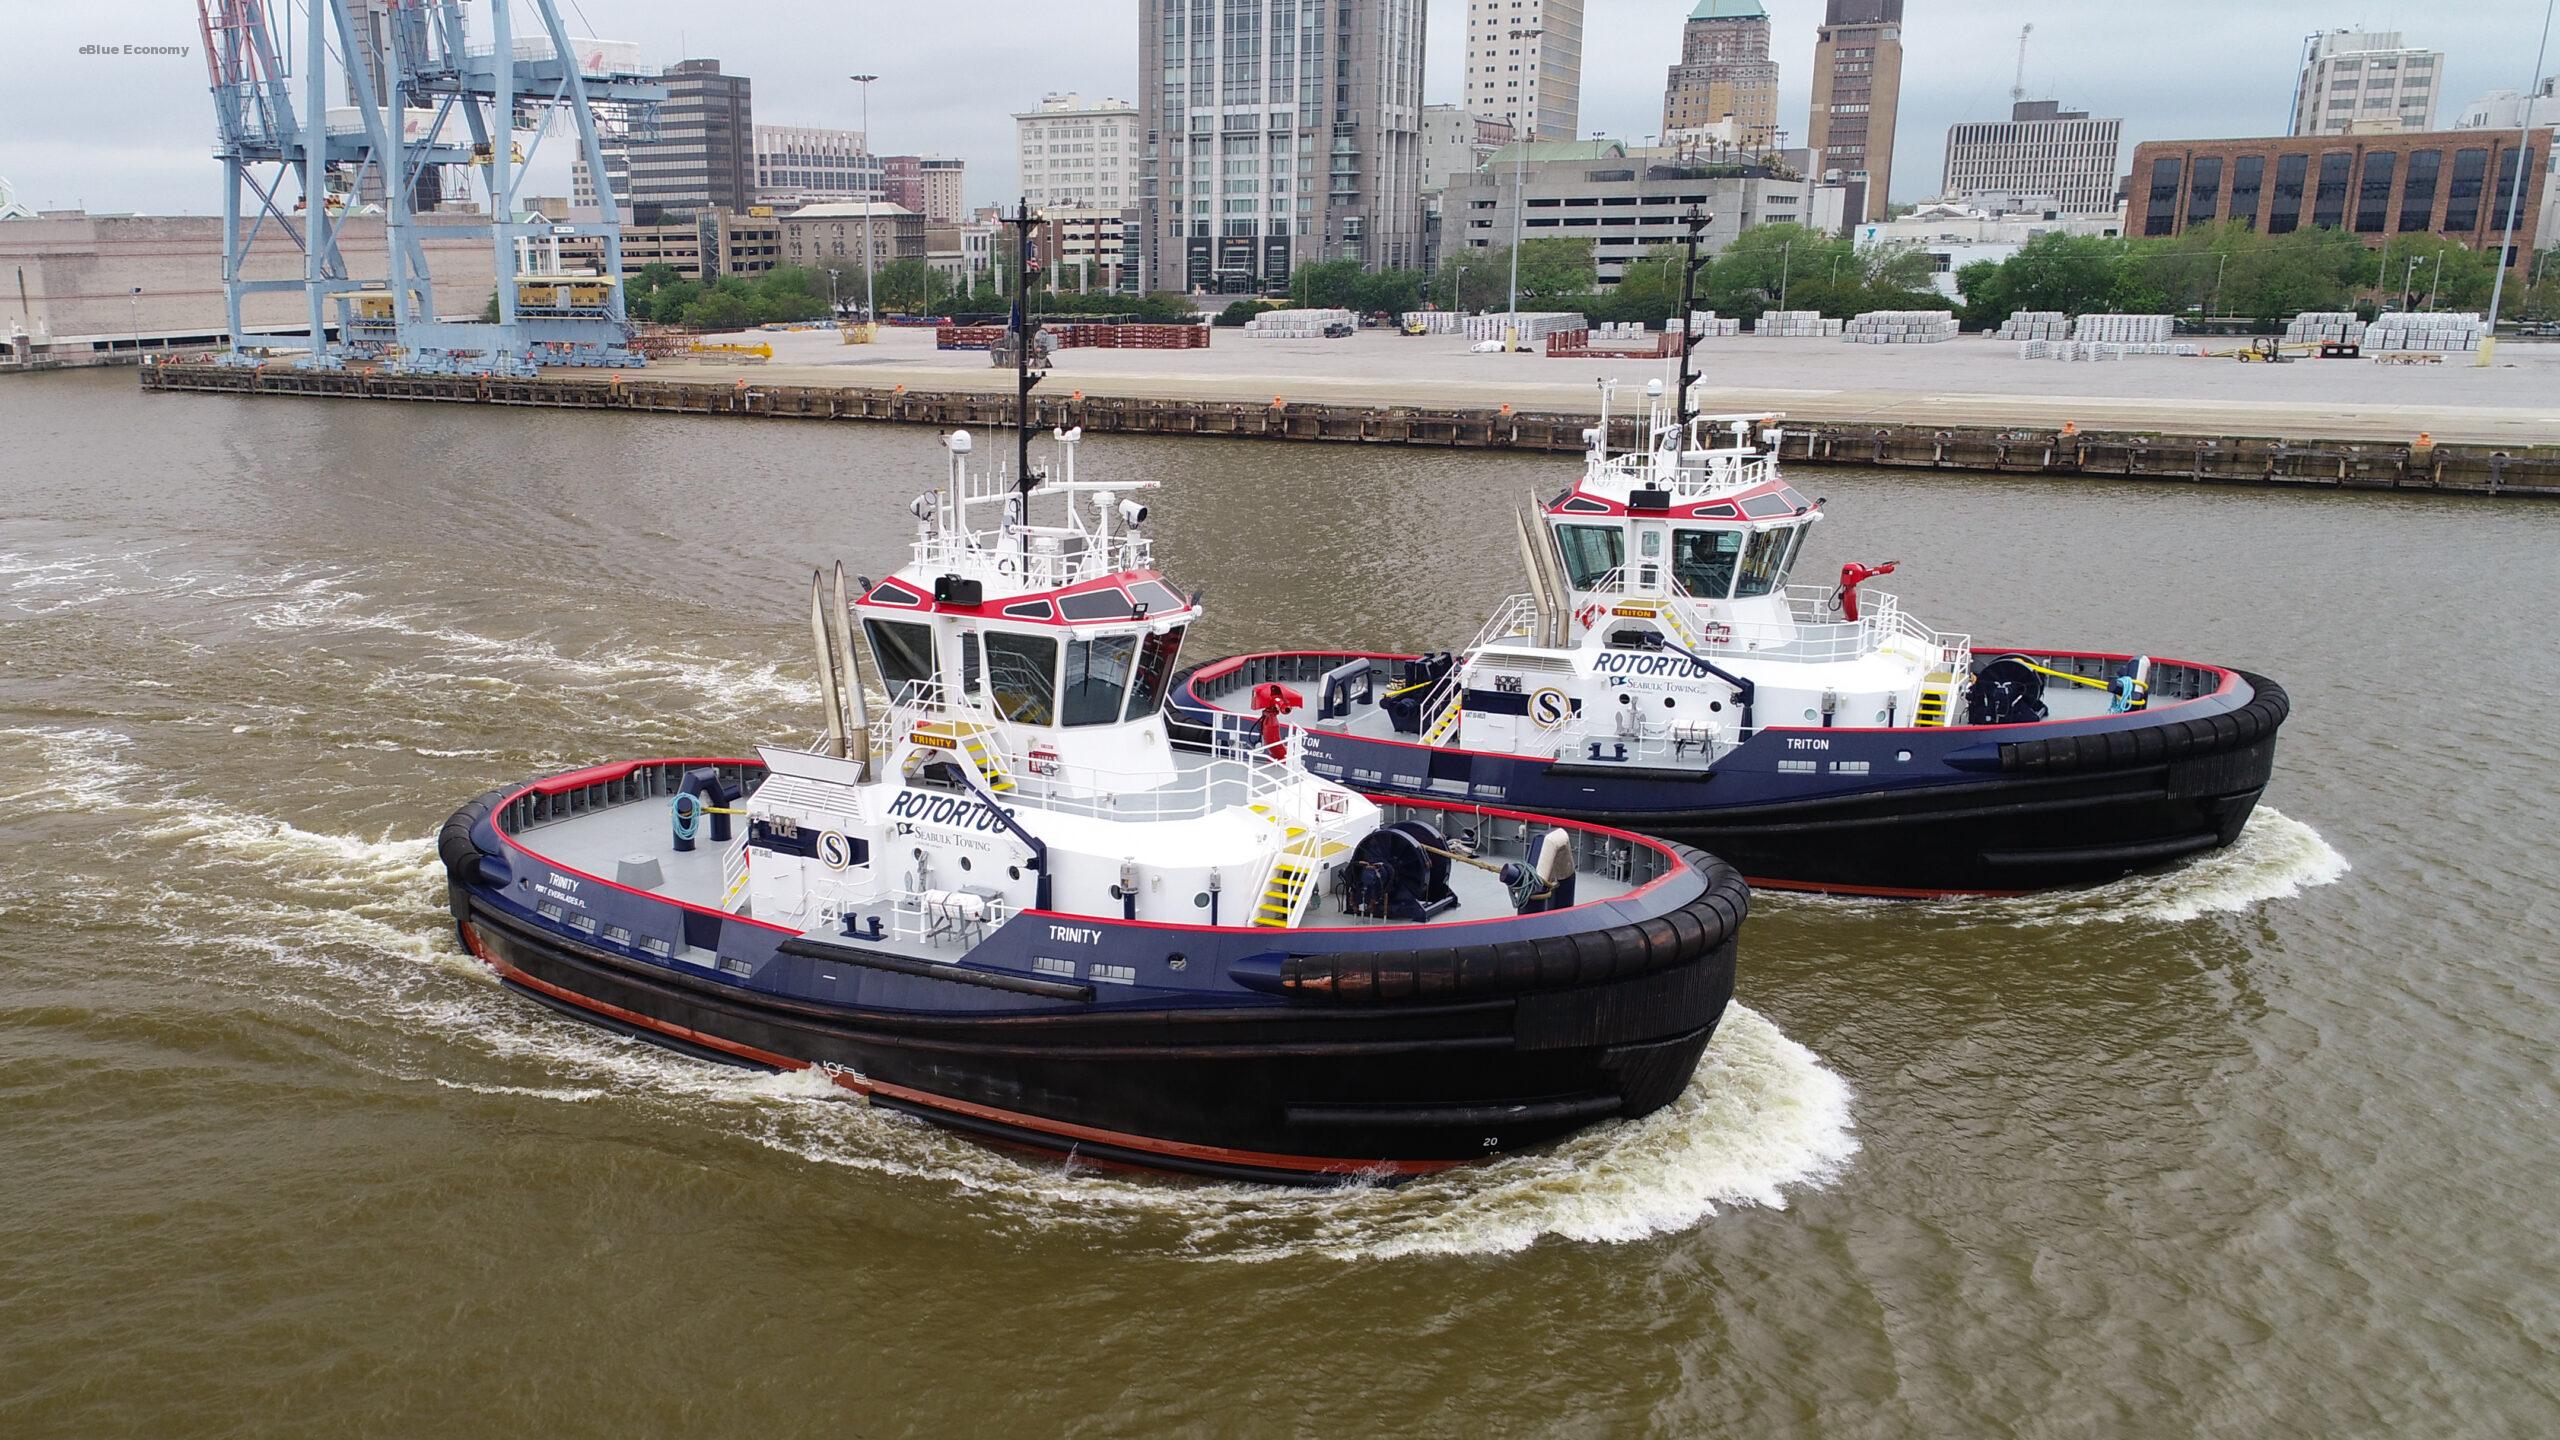 eBlue_economy_Tugs Towing & Offshore-Newsletter 47 2022 PDF